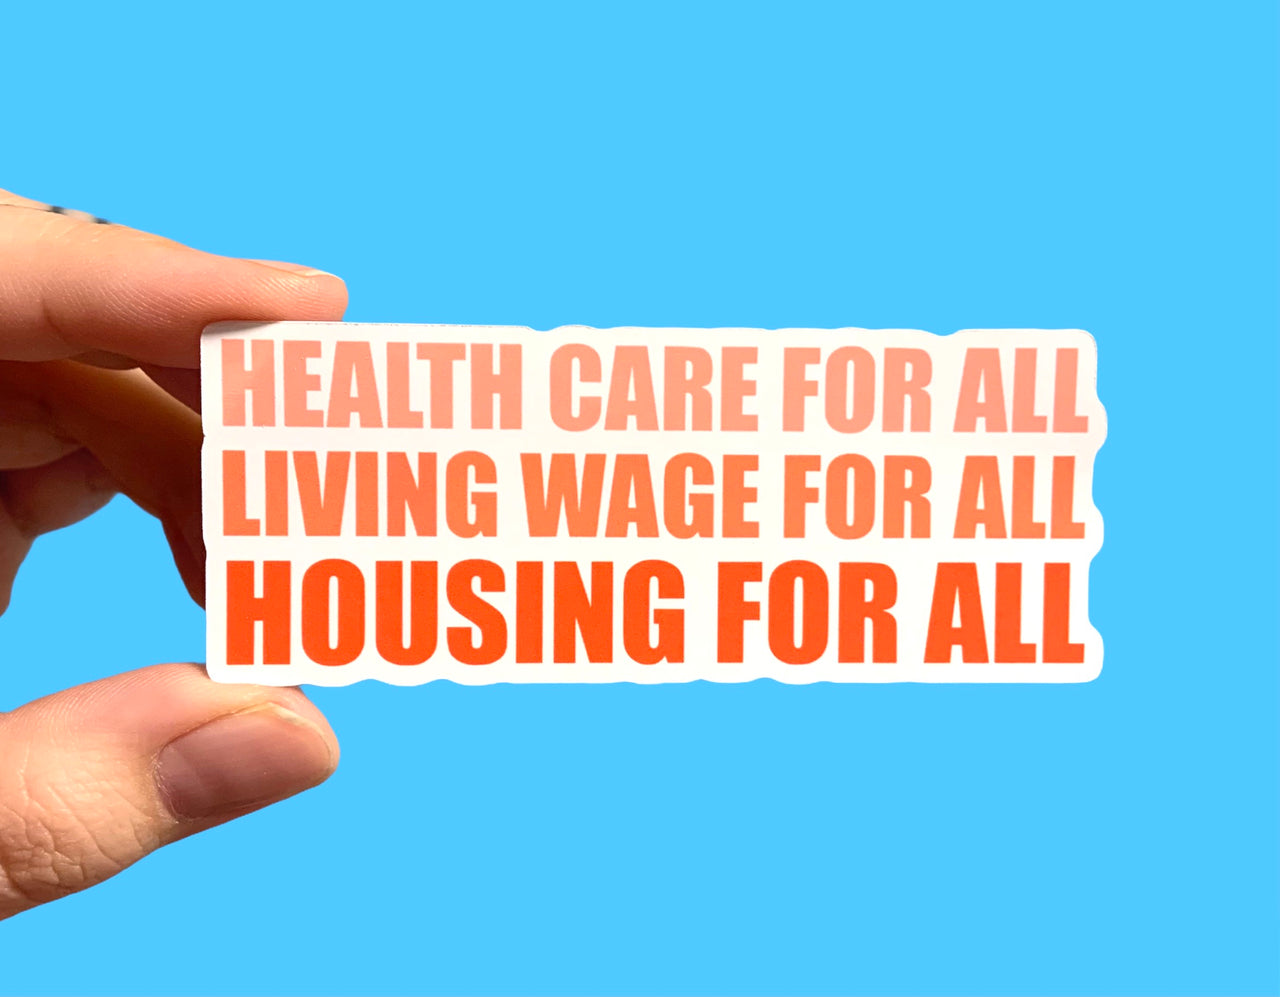 Health care for all (pack of 3 or 5 stickers)